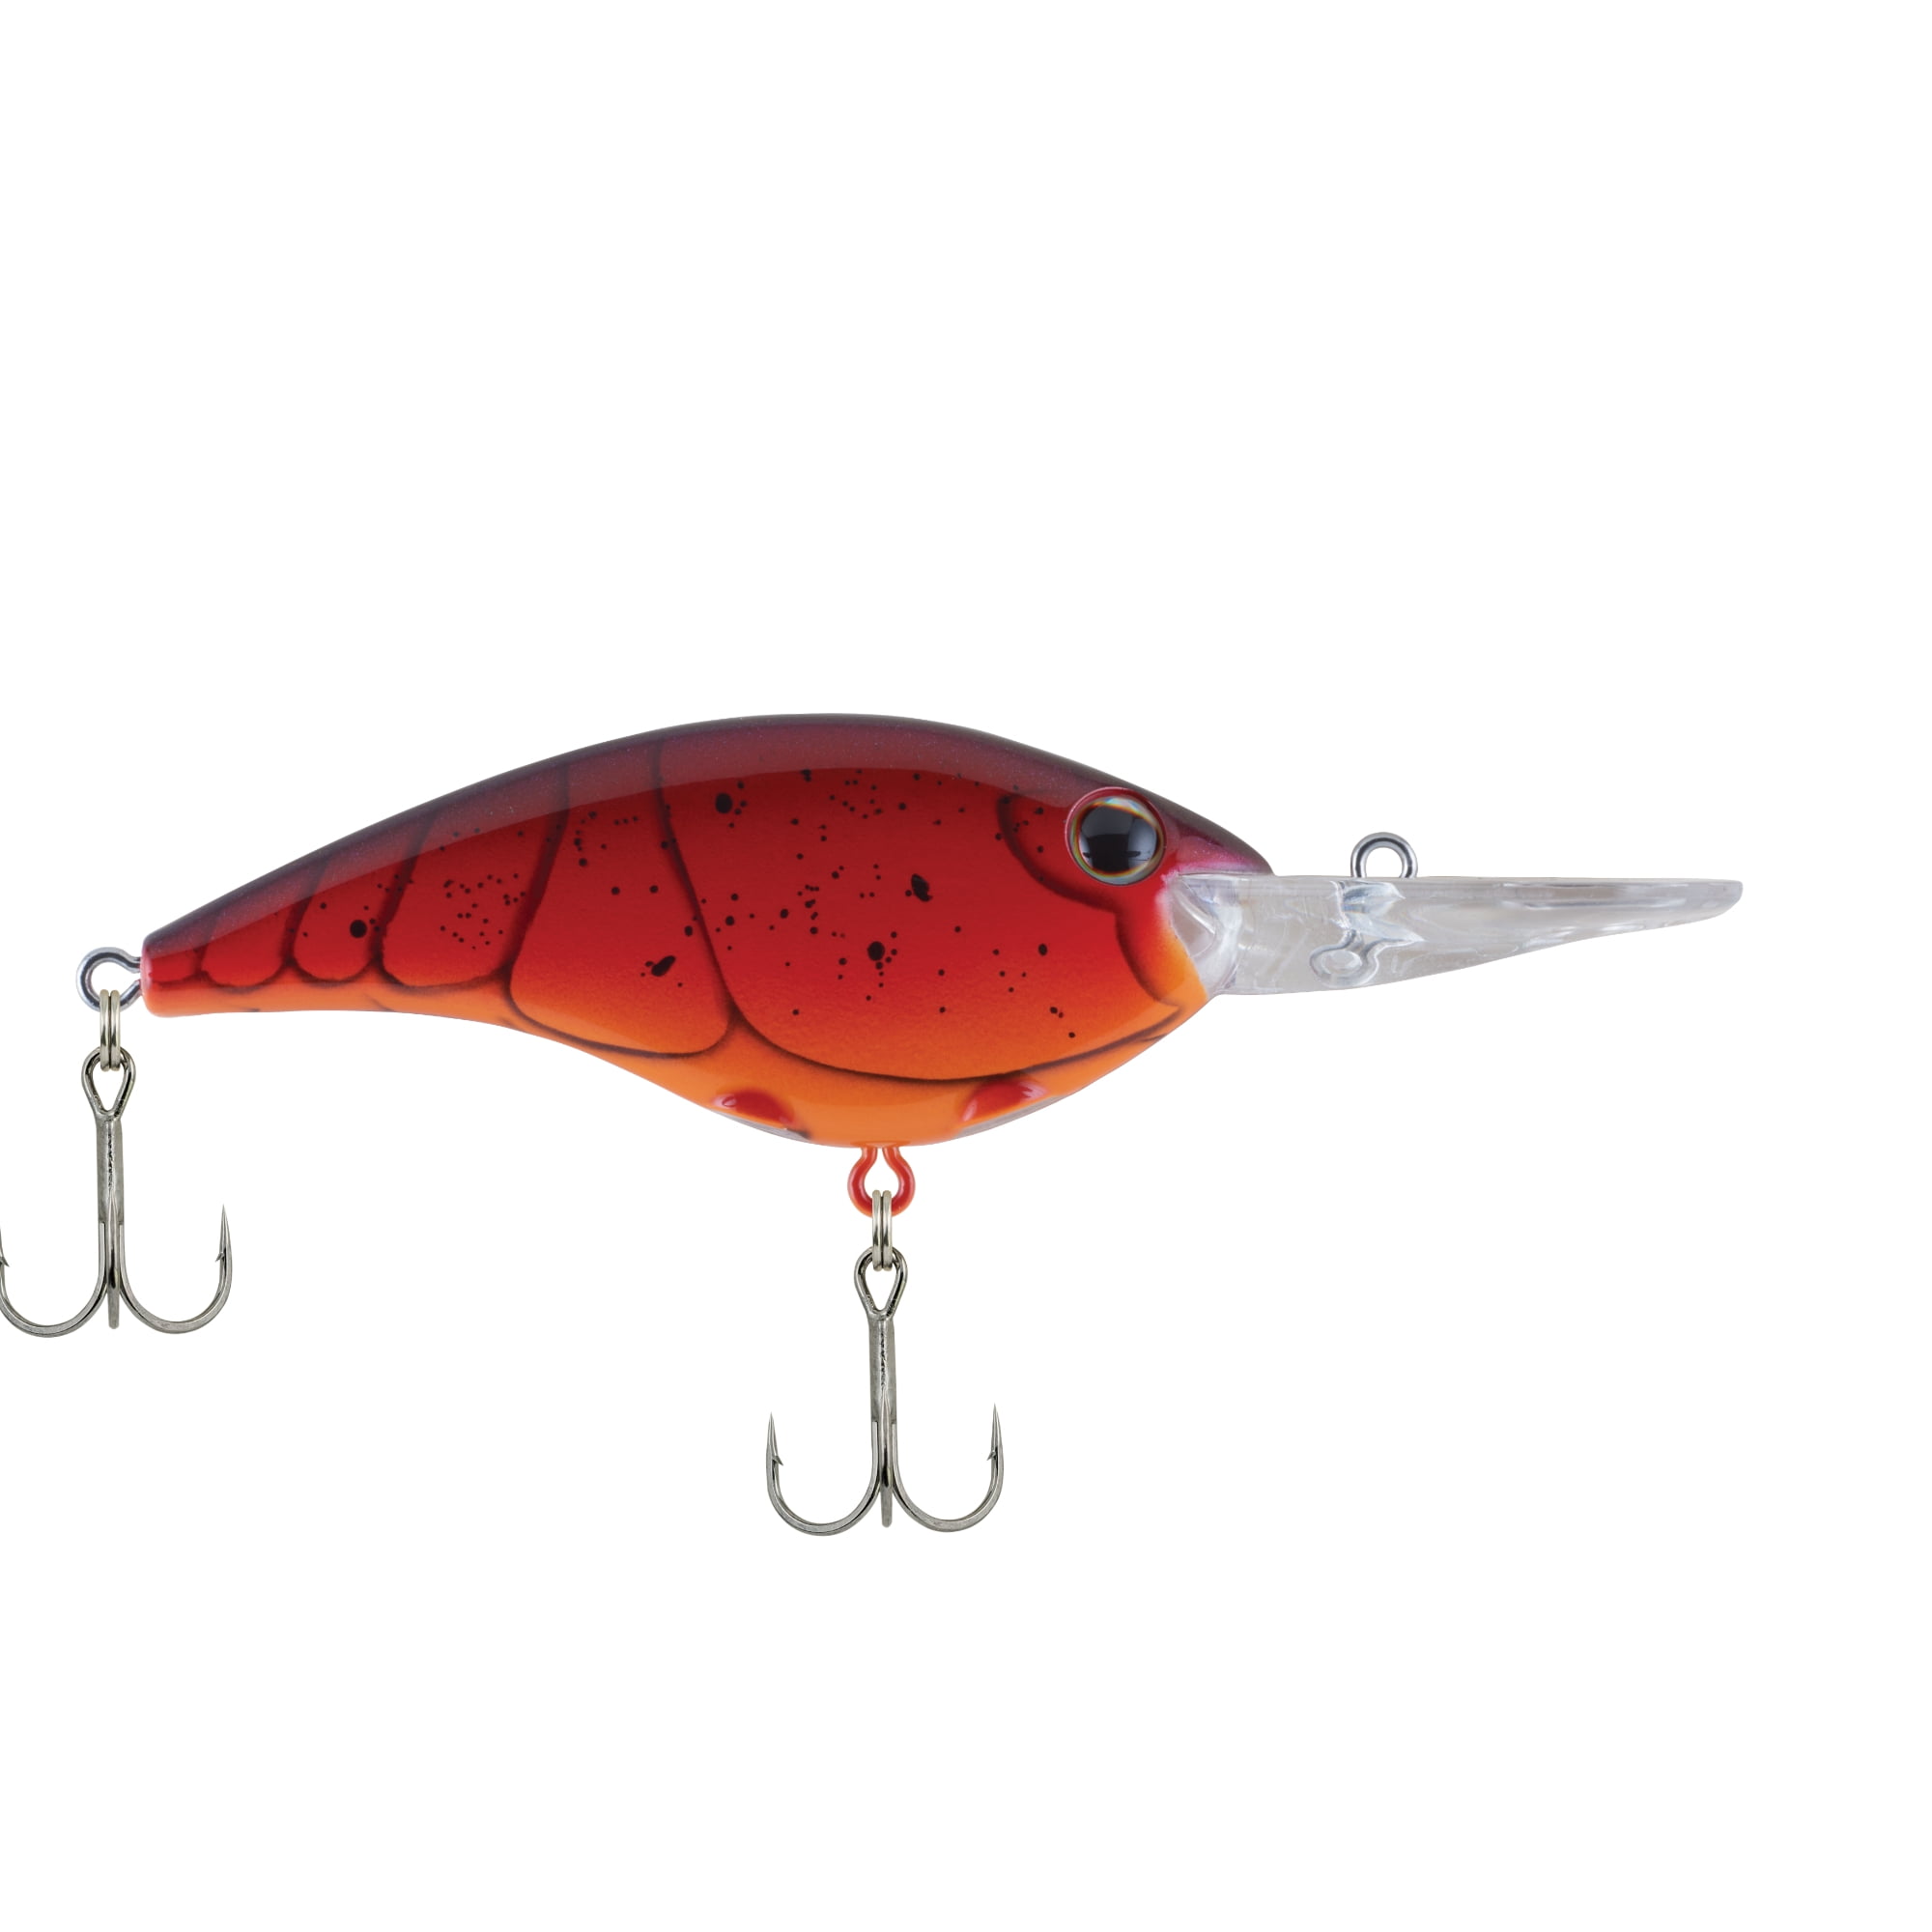 Berkley Frittside Fishing Lure, Special Red Craw, 1/2 oz 